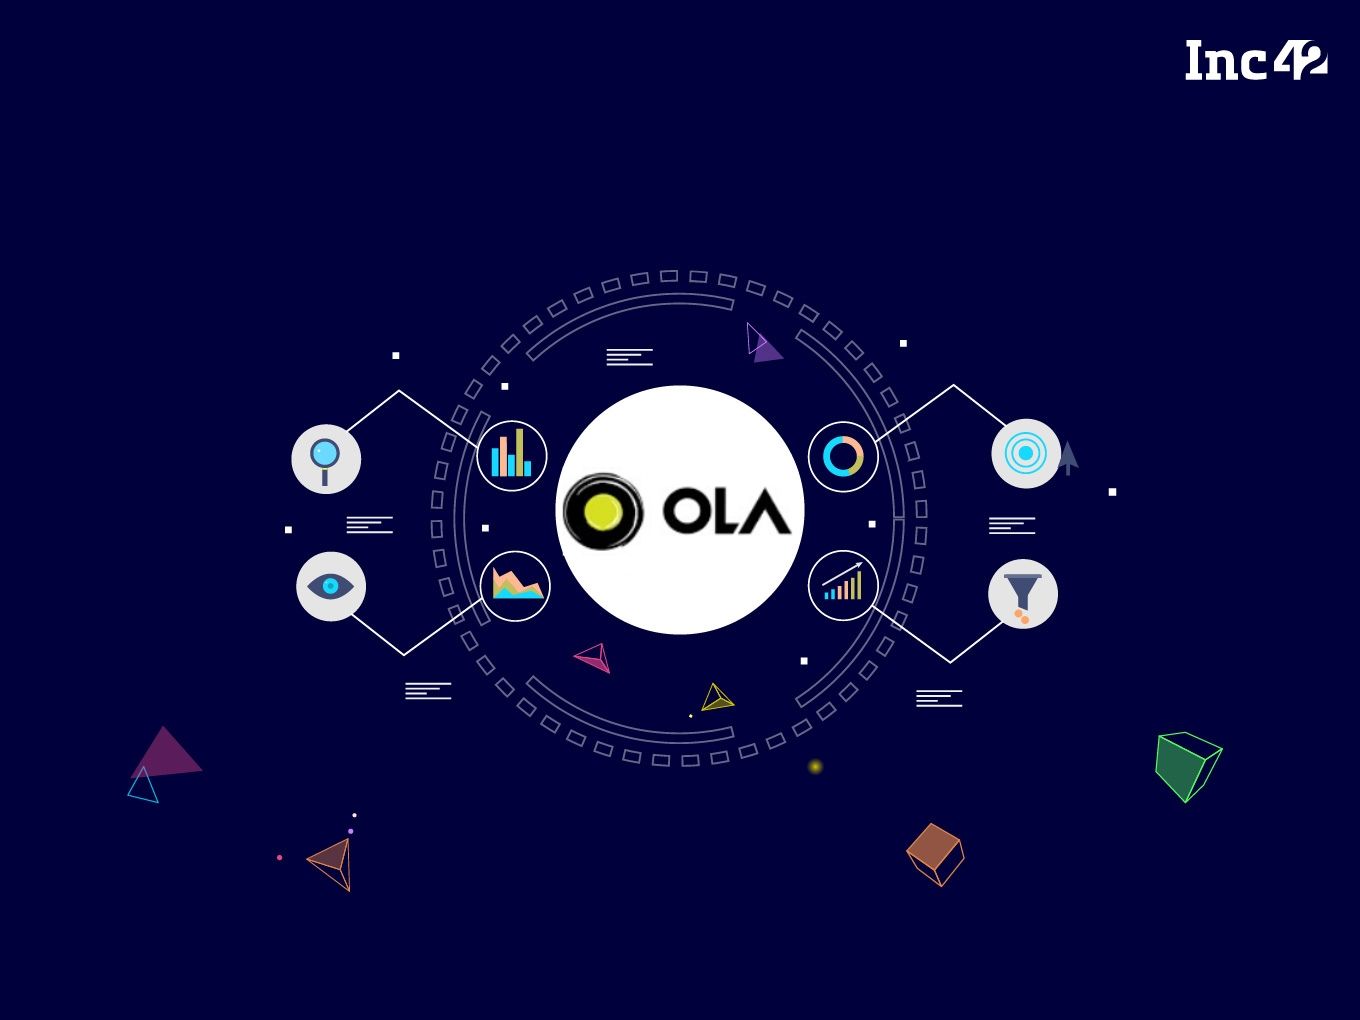 [What The Financials] Ola’s Path To Profitability, IPO Blocked By Losses In Food, Vehicle Leasing